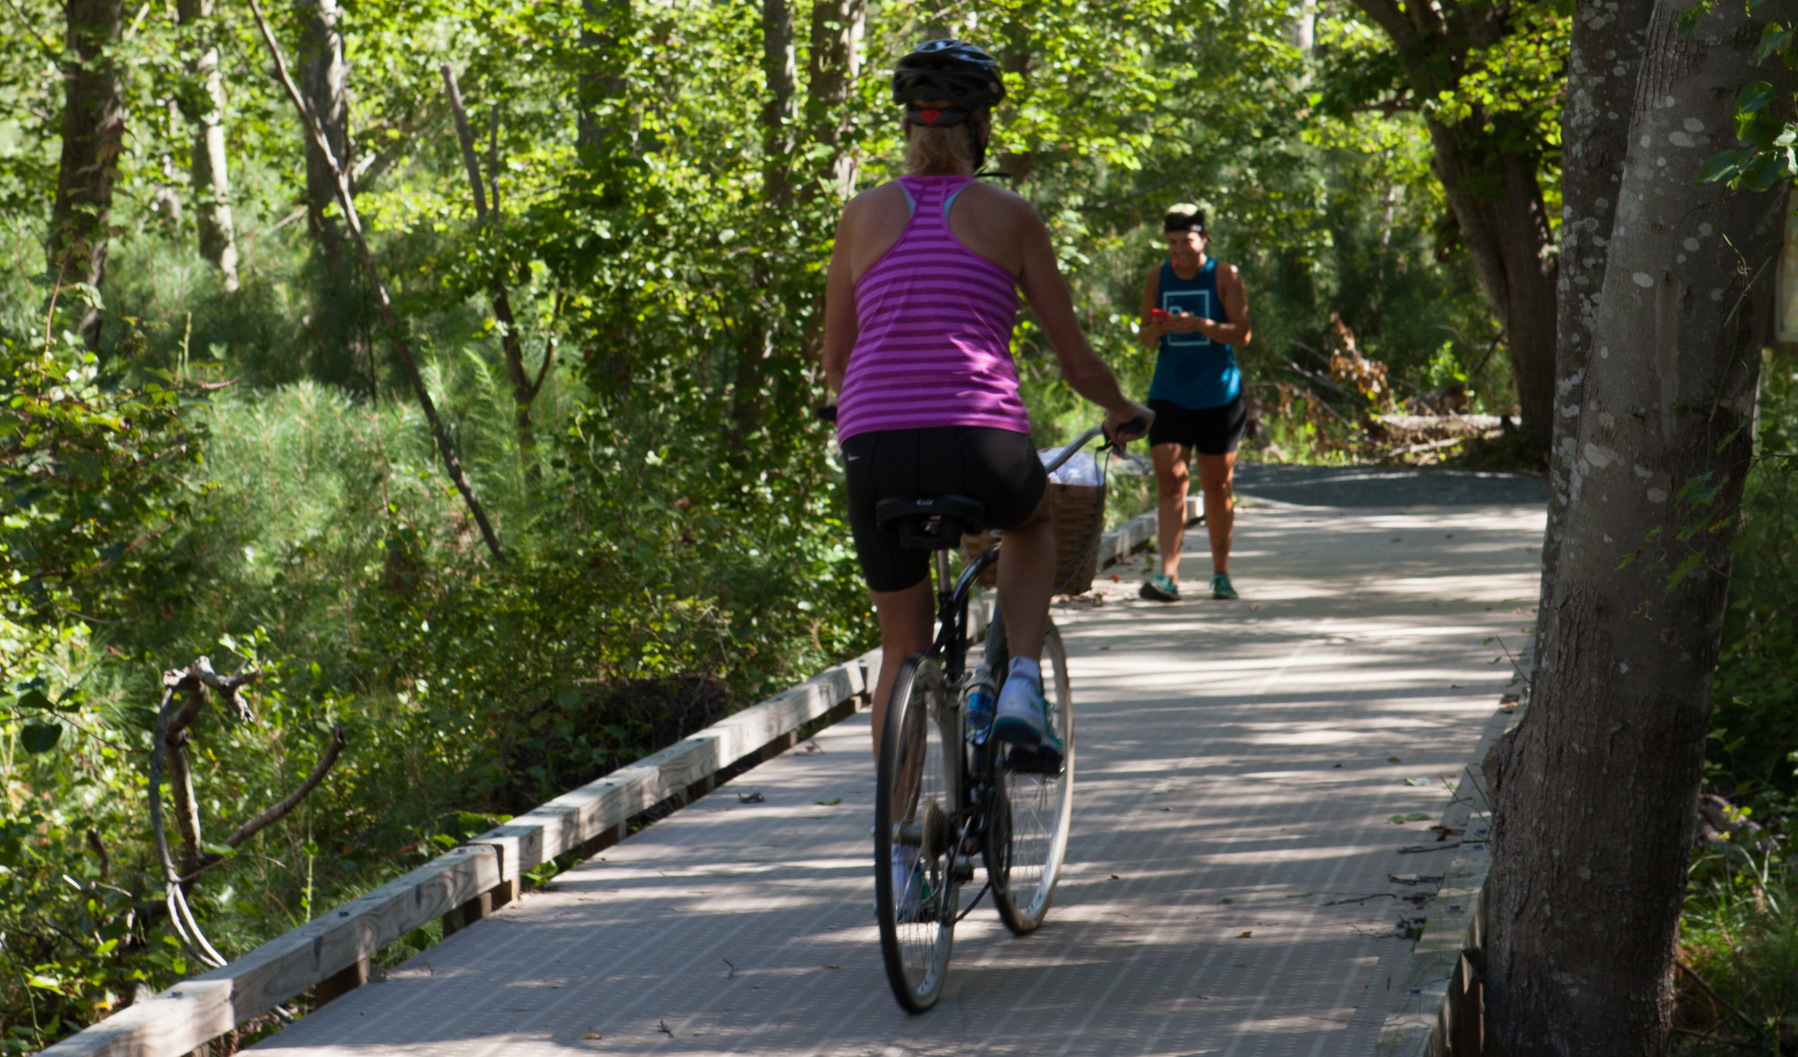 Hikers and bikers beat the heat on a cool stretch of the Fred Hudson Trail